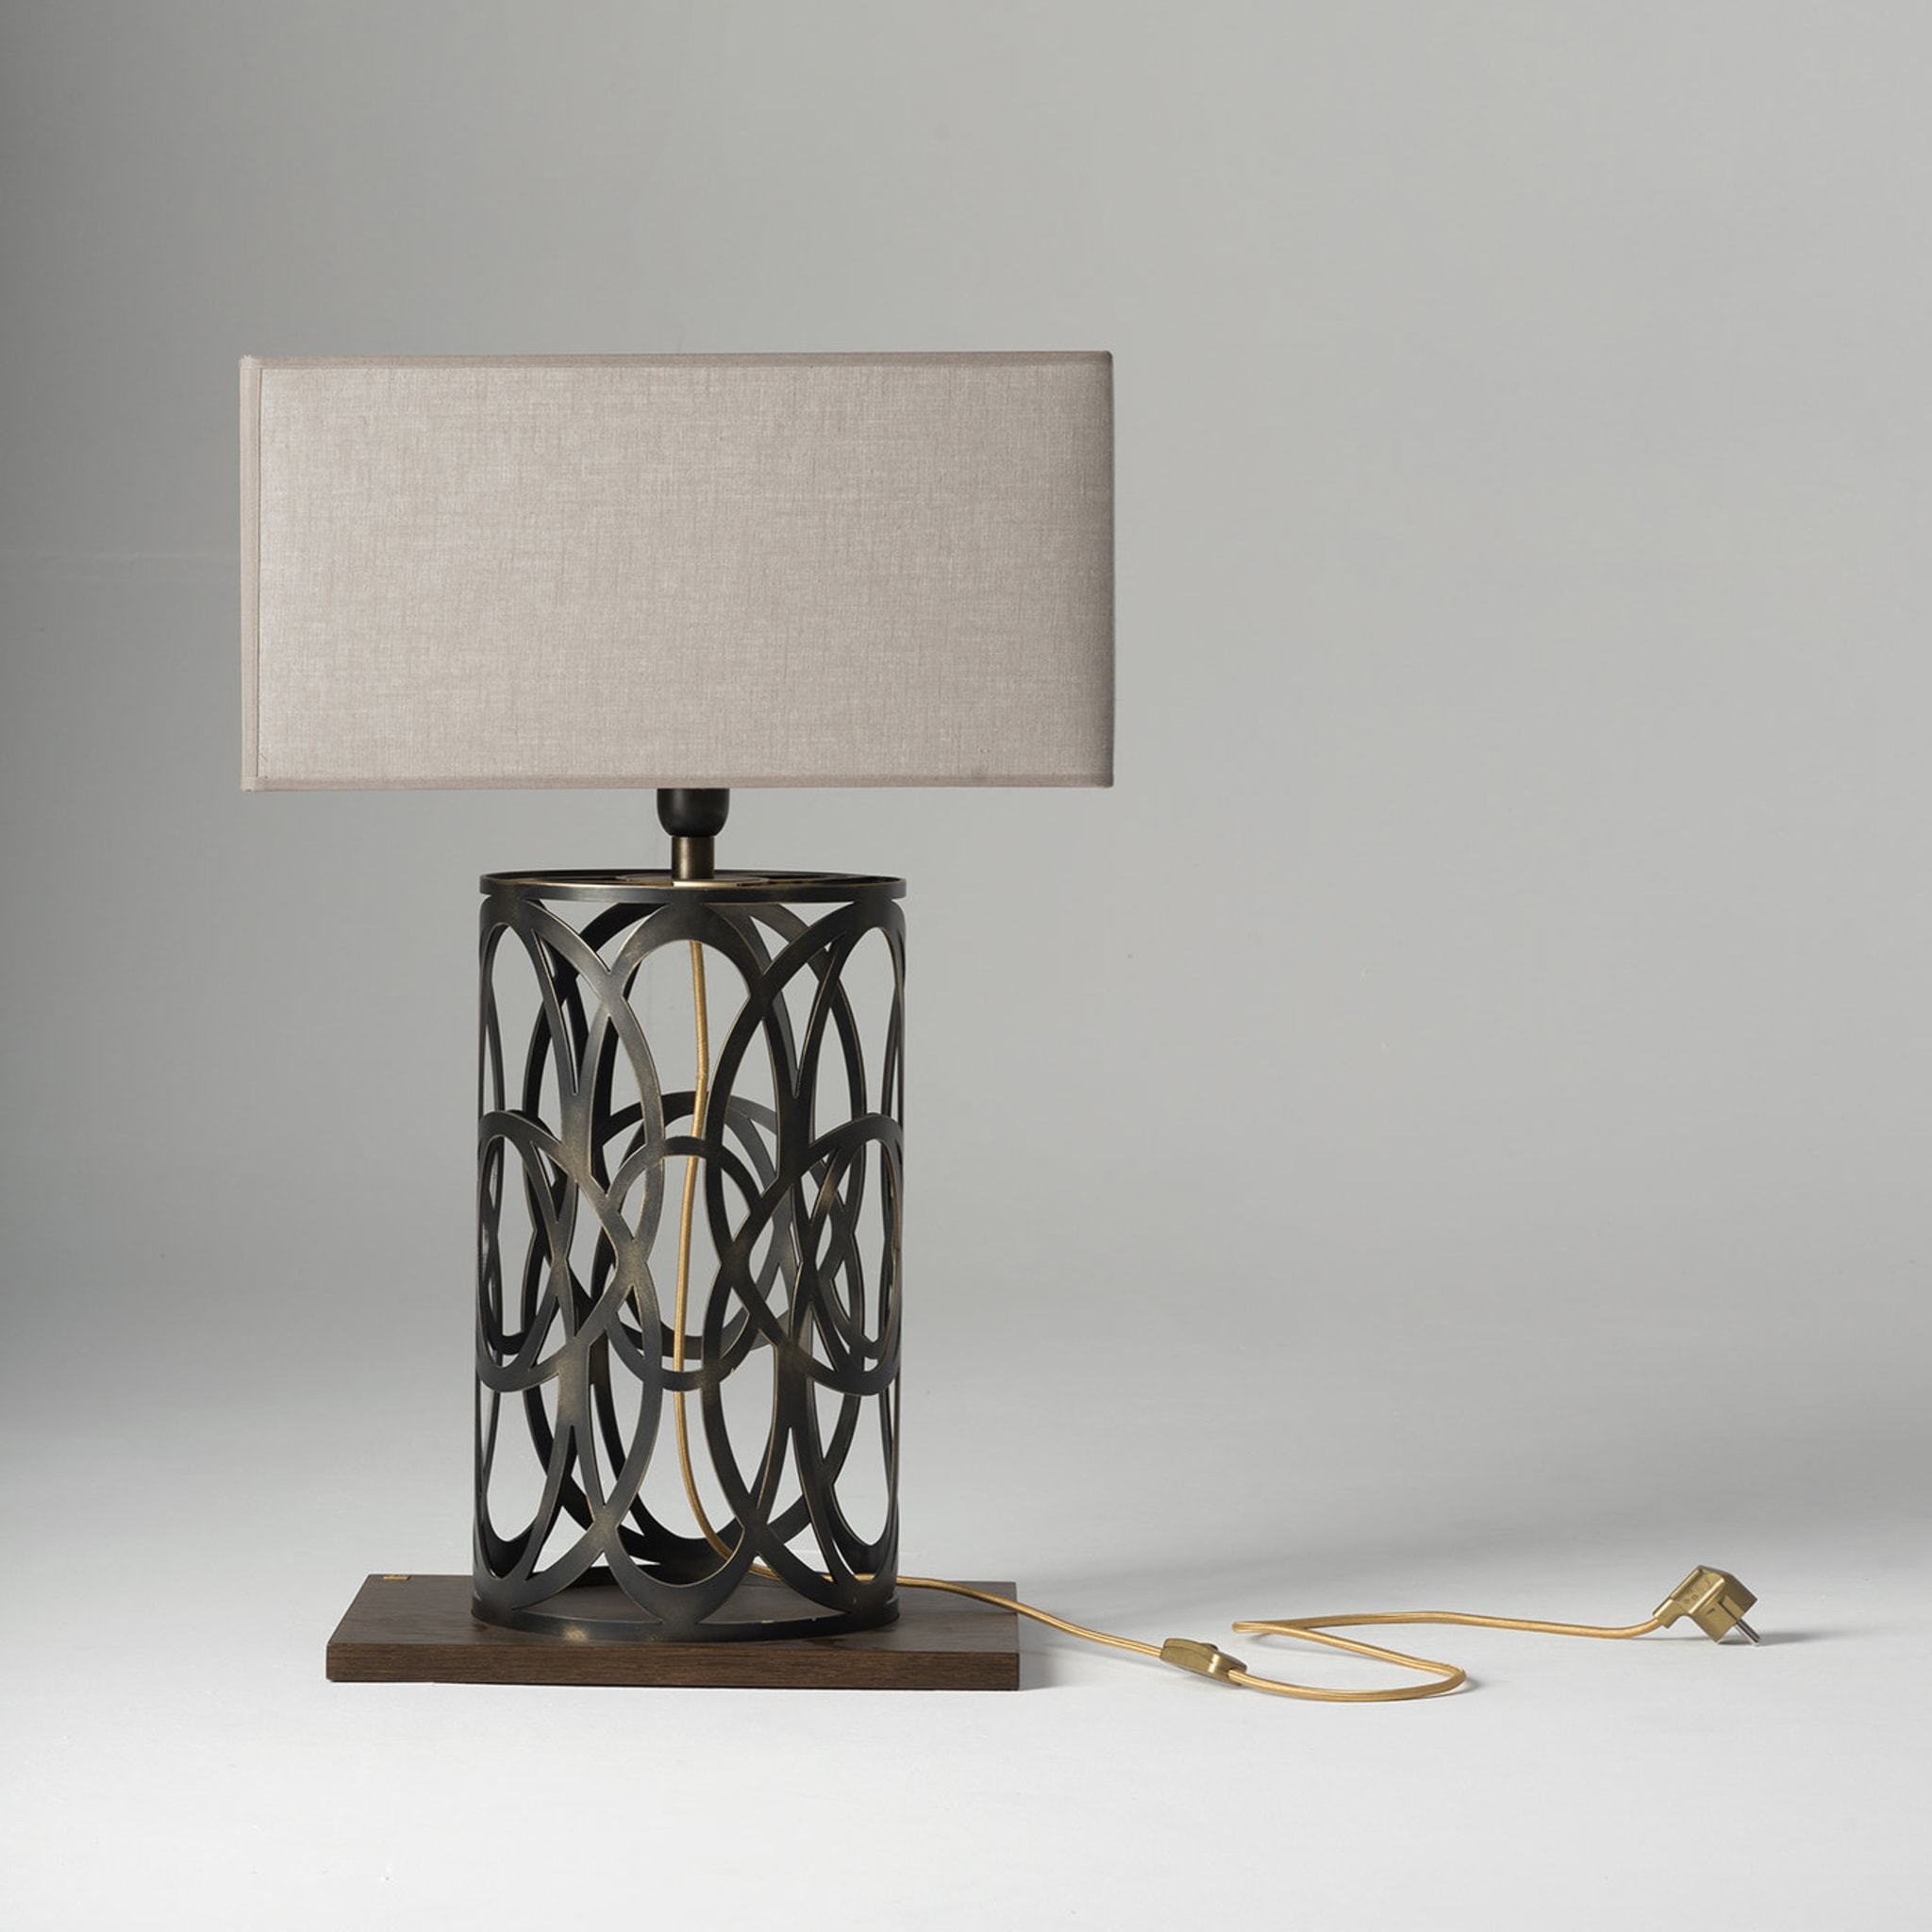 Violante Table Lamp Tribeca Collection by Marco and Giulio Mantellassi - Alternative view 1